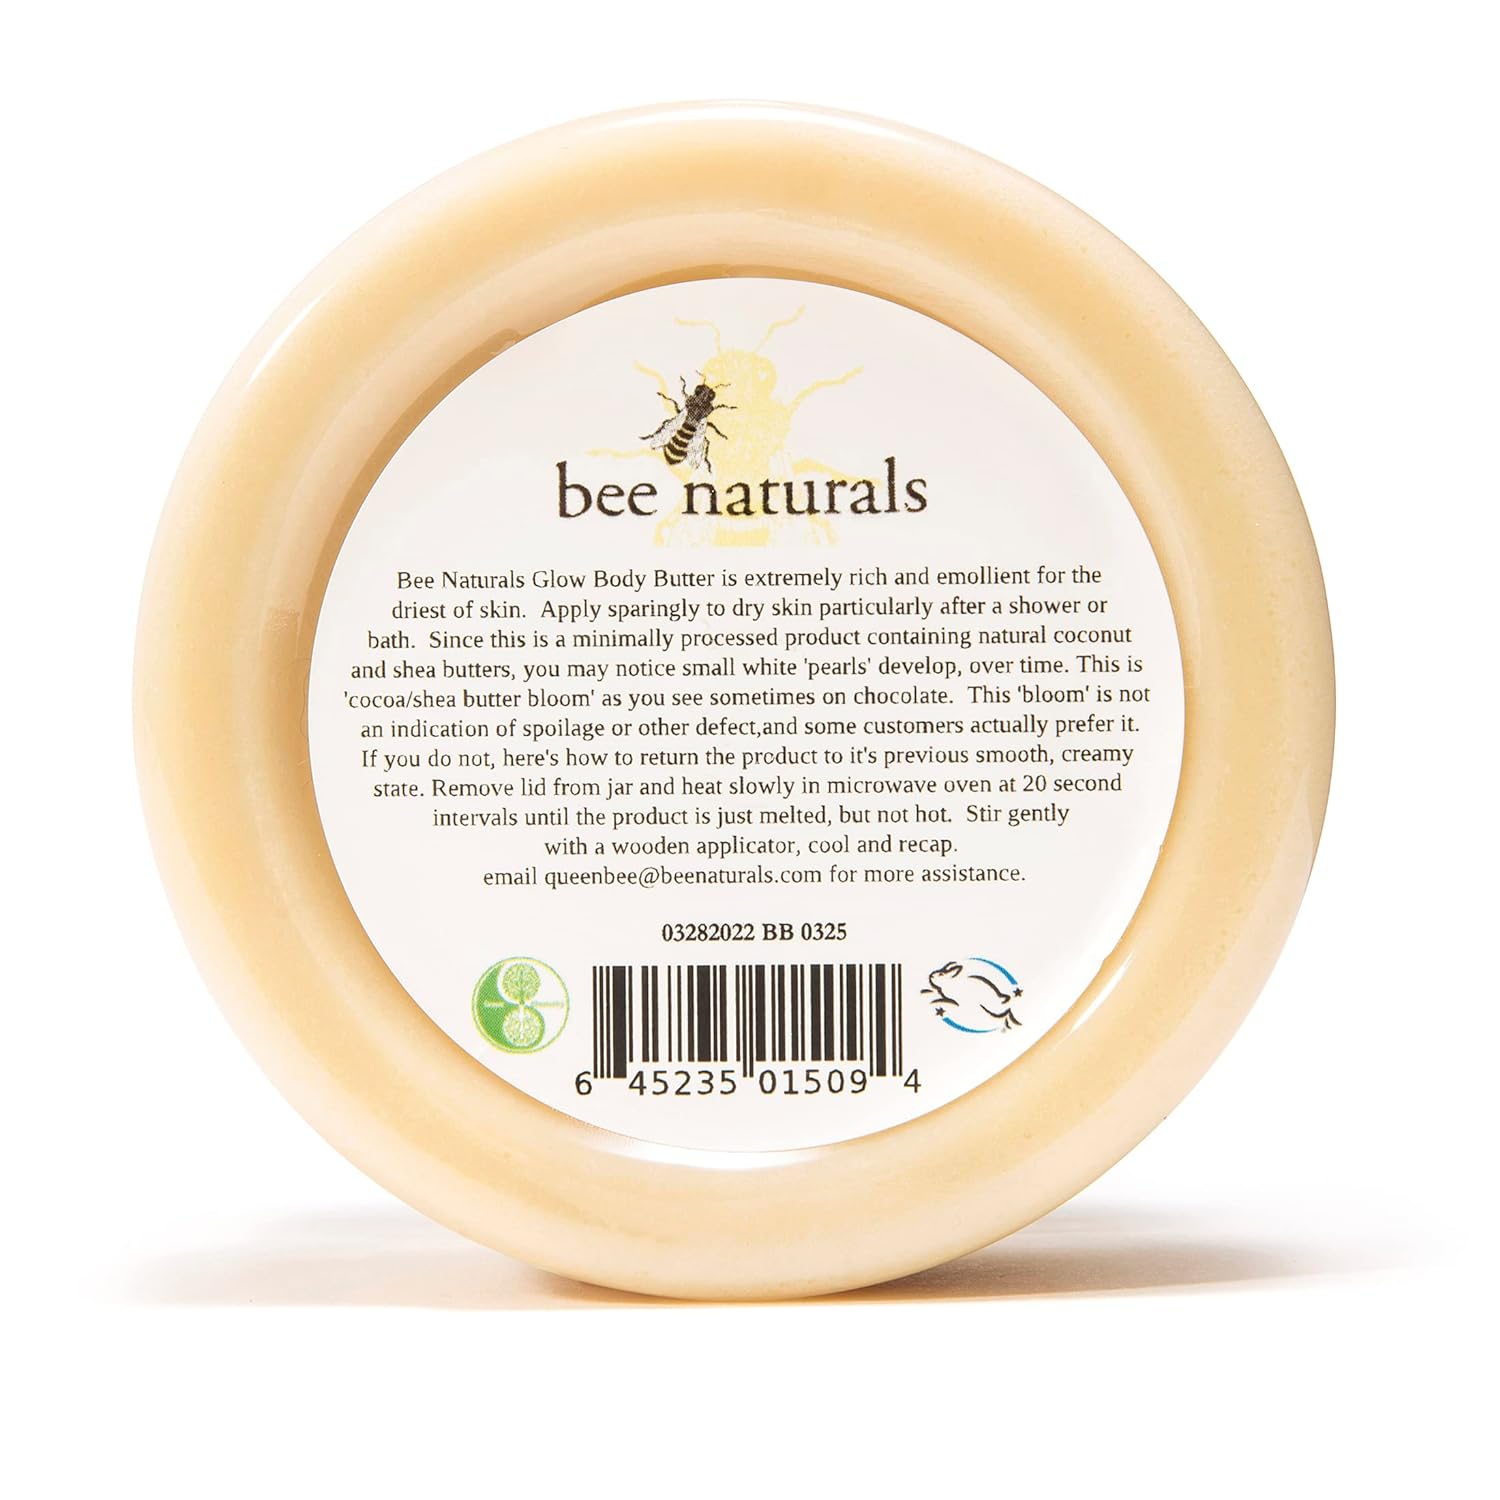 Radiant Glow Body Butter - 5 oz - Luxurious Moisturizer with Shea, Sunflower Oil & Vitamin E - Deep Hydration for Soft Skin - Vanilla Scent - Unisex - Cruelty-Free, Made in USA : Other Products : Beauty & Personal Care